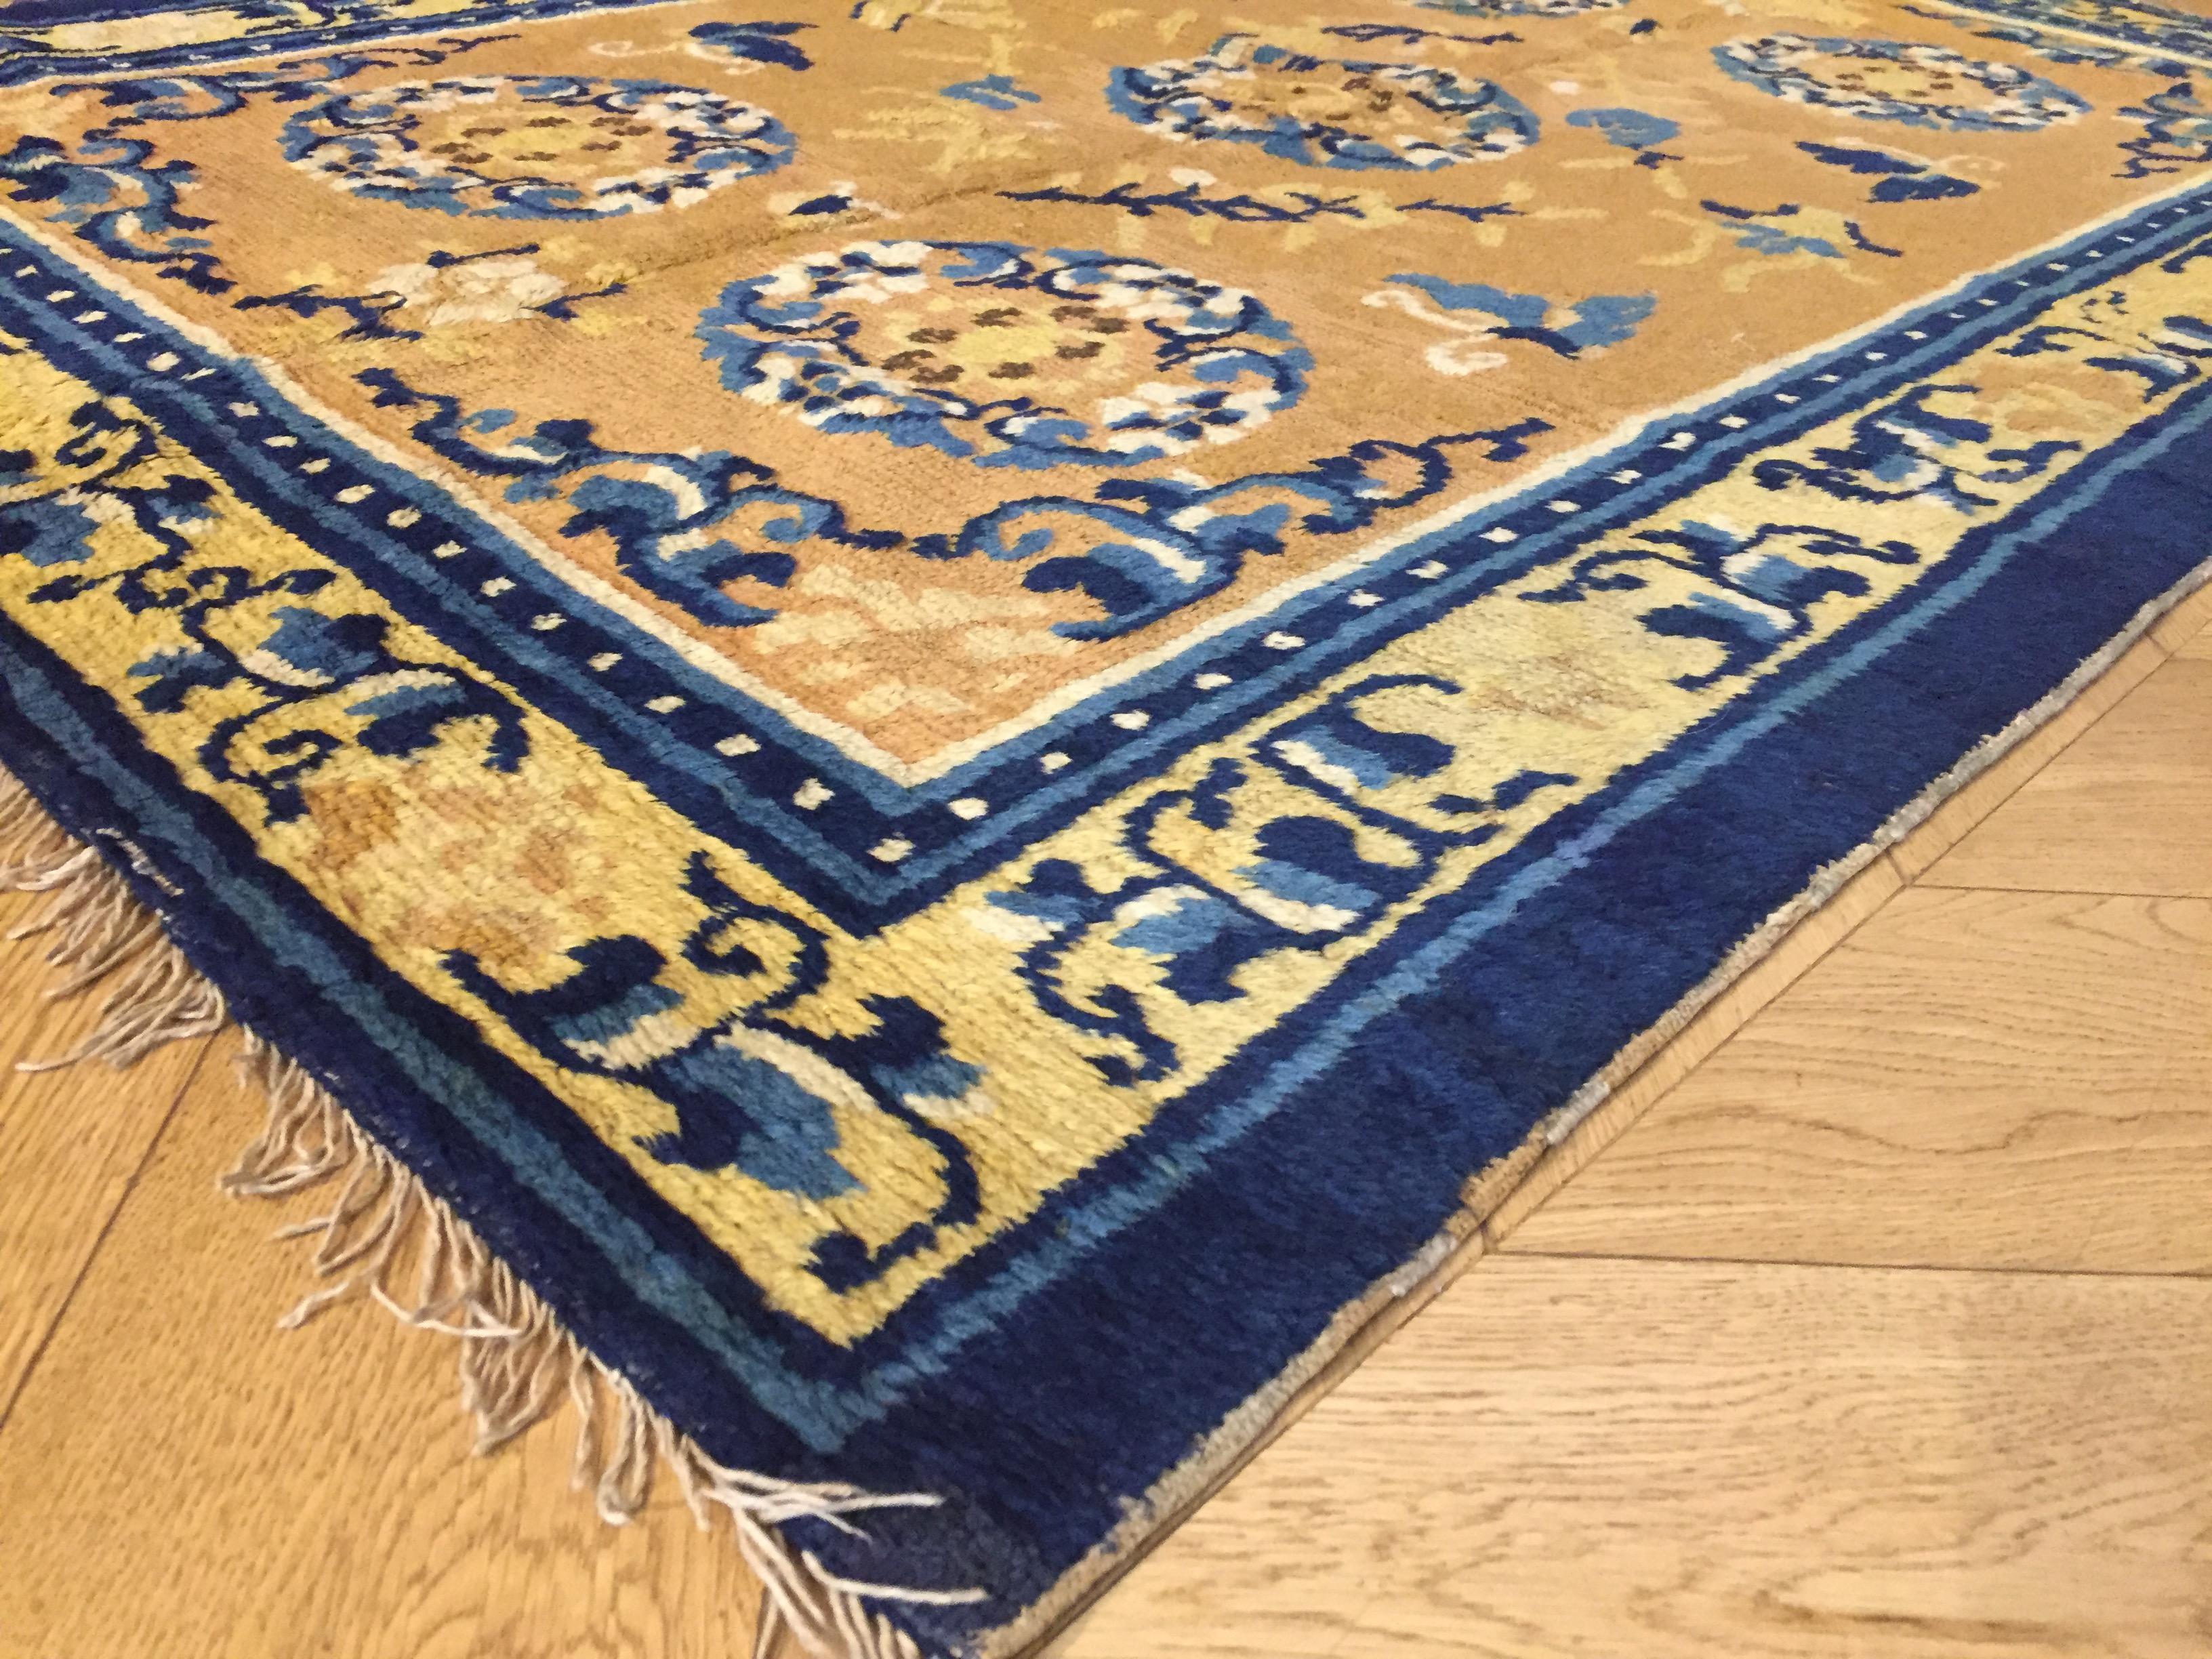 19th Century Chinese Ninxia Ocher Yellow Rug Fine Hand Knotted, Cotton and Wool For Sale 5